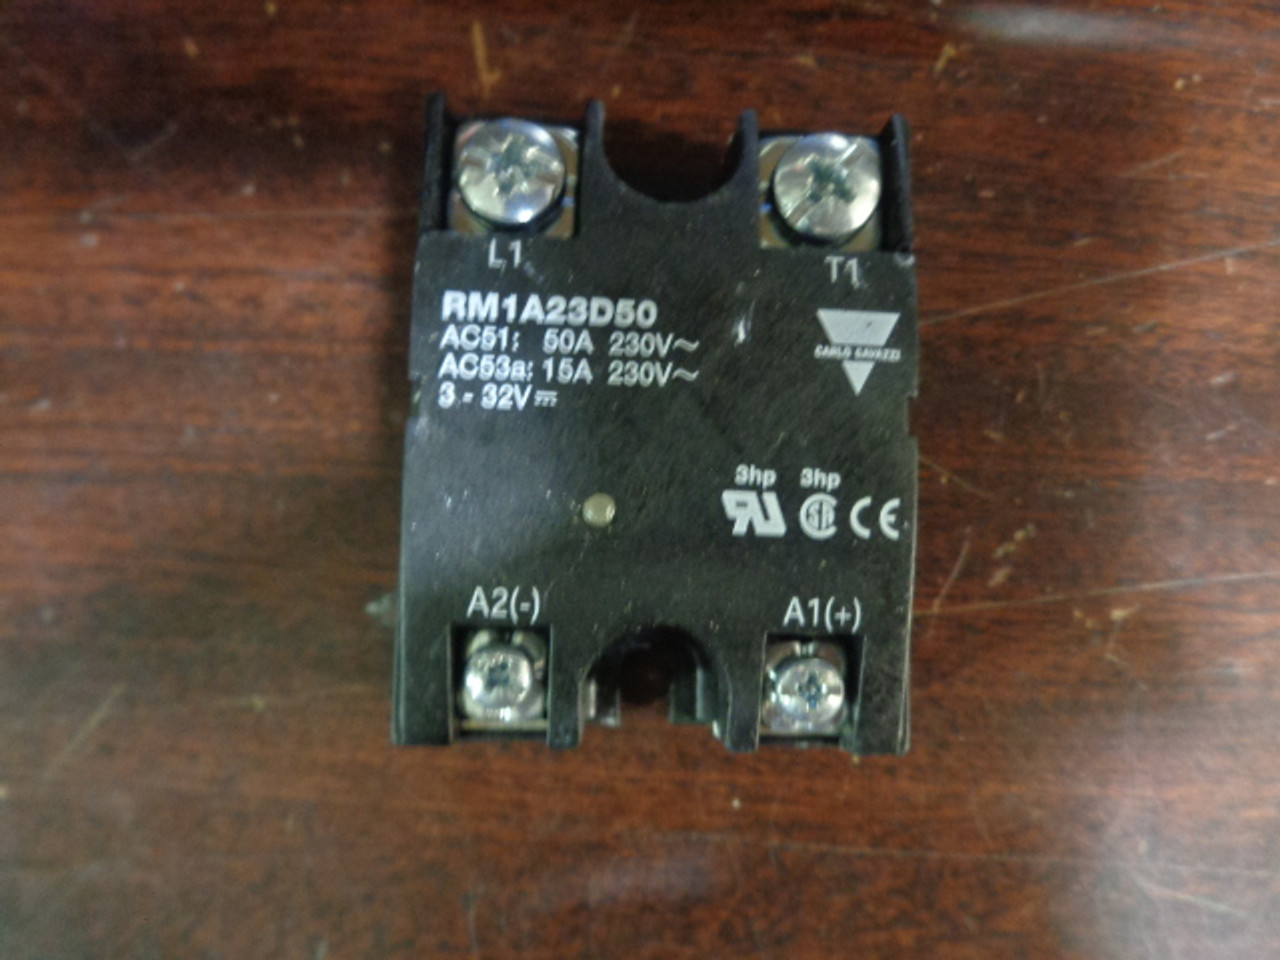 Carlo Gavazzi RM1A23D50 Solid State Relay